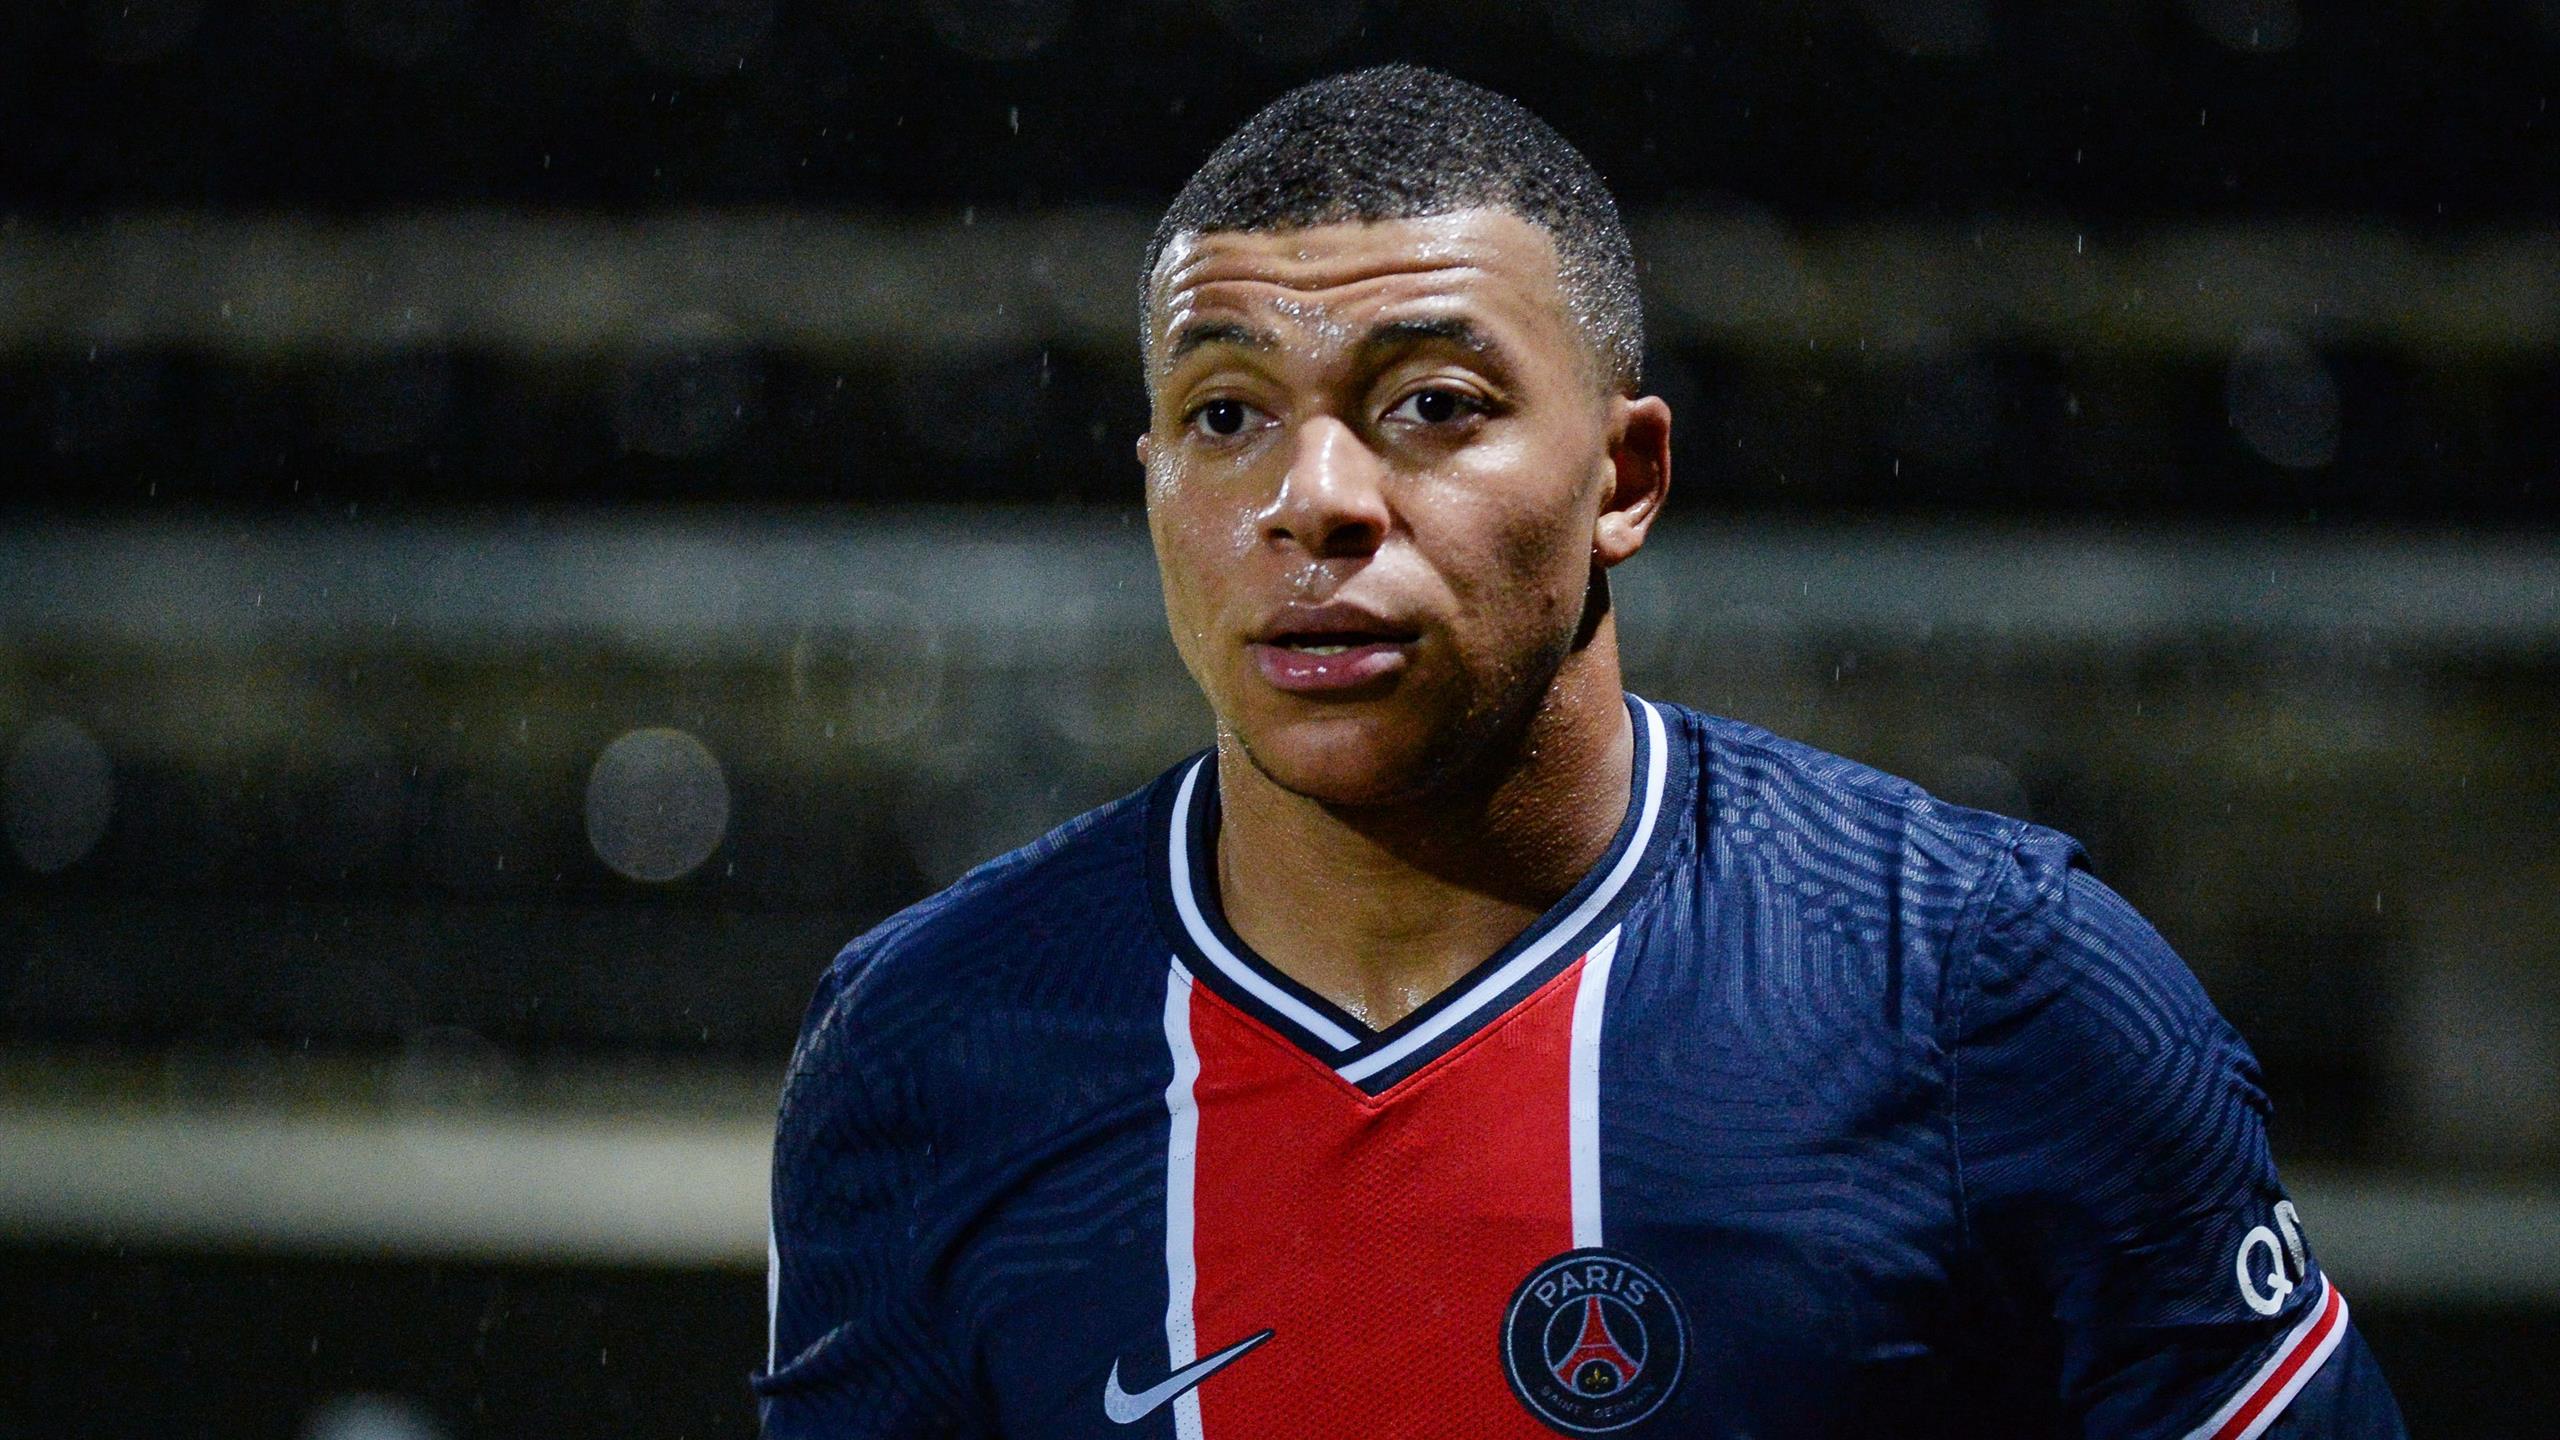 Striker Kylian Mbappé of French football club Paris Saint-Germain has hinted that he will soon decide his future.